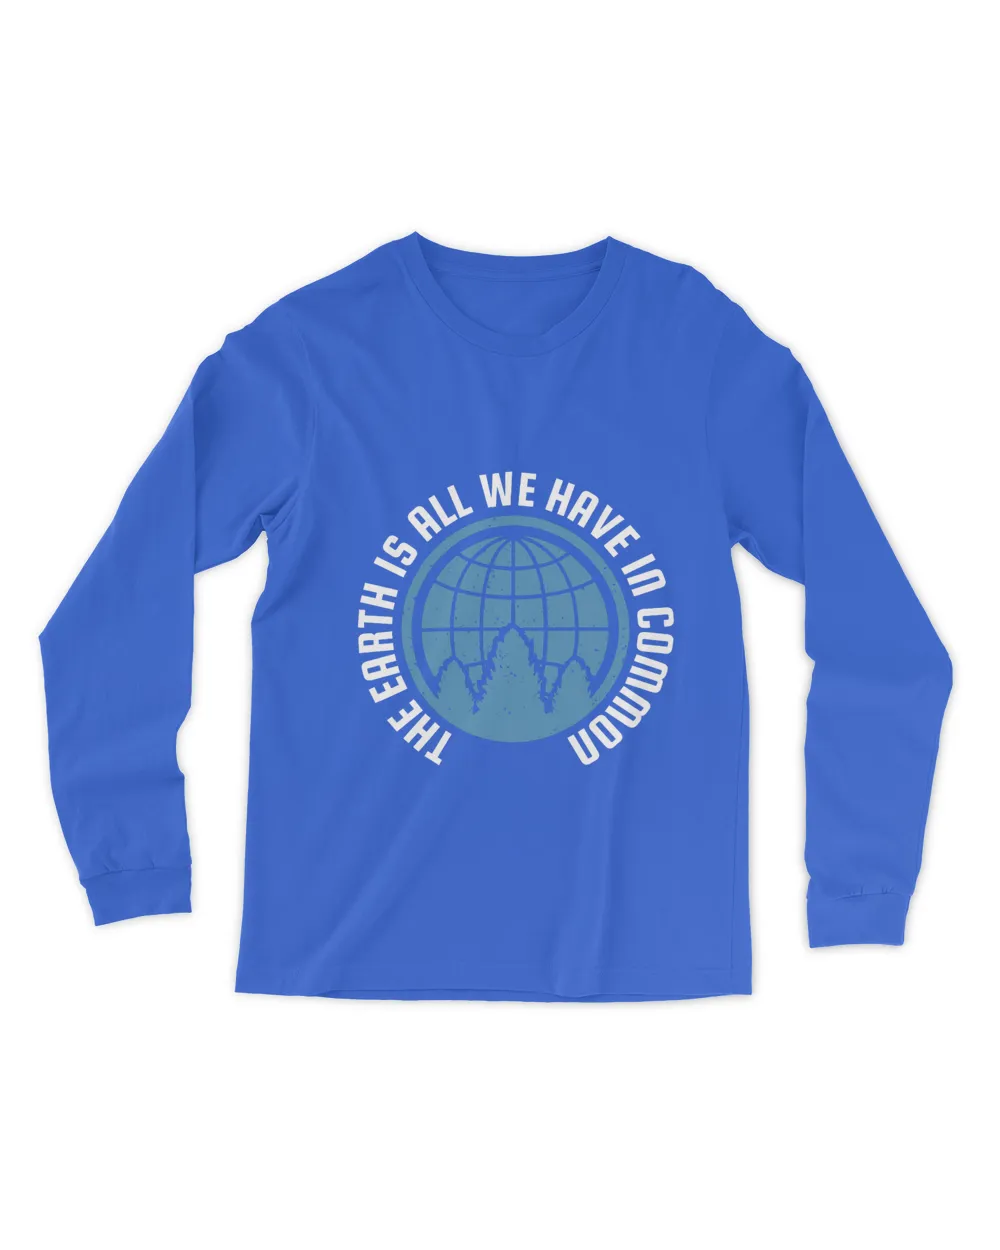 The Earth Is All We Have In Common (Earth Day Slogan T-Shirt)